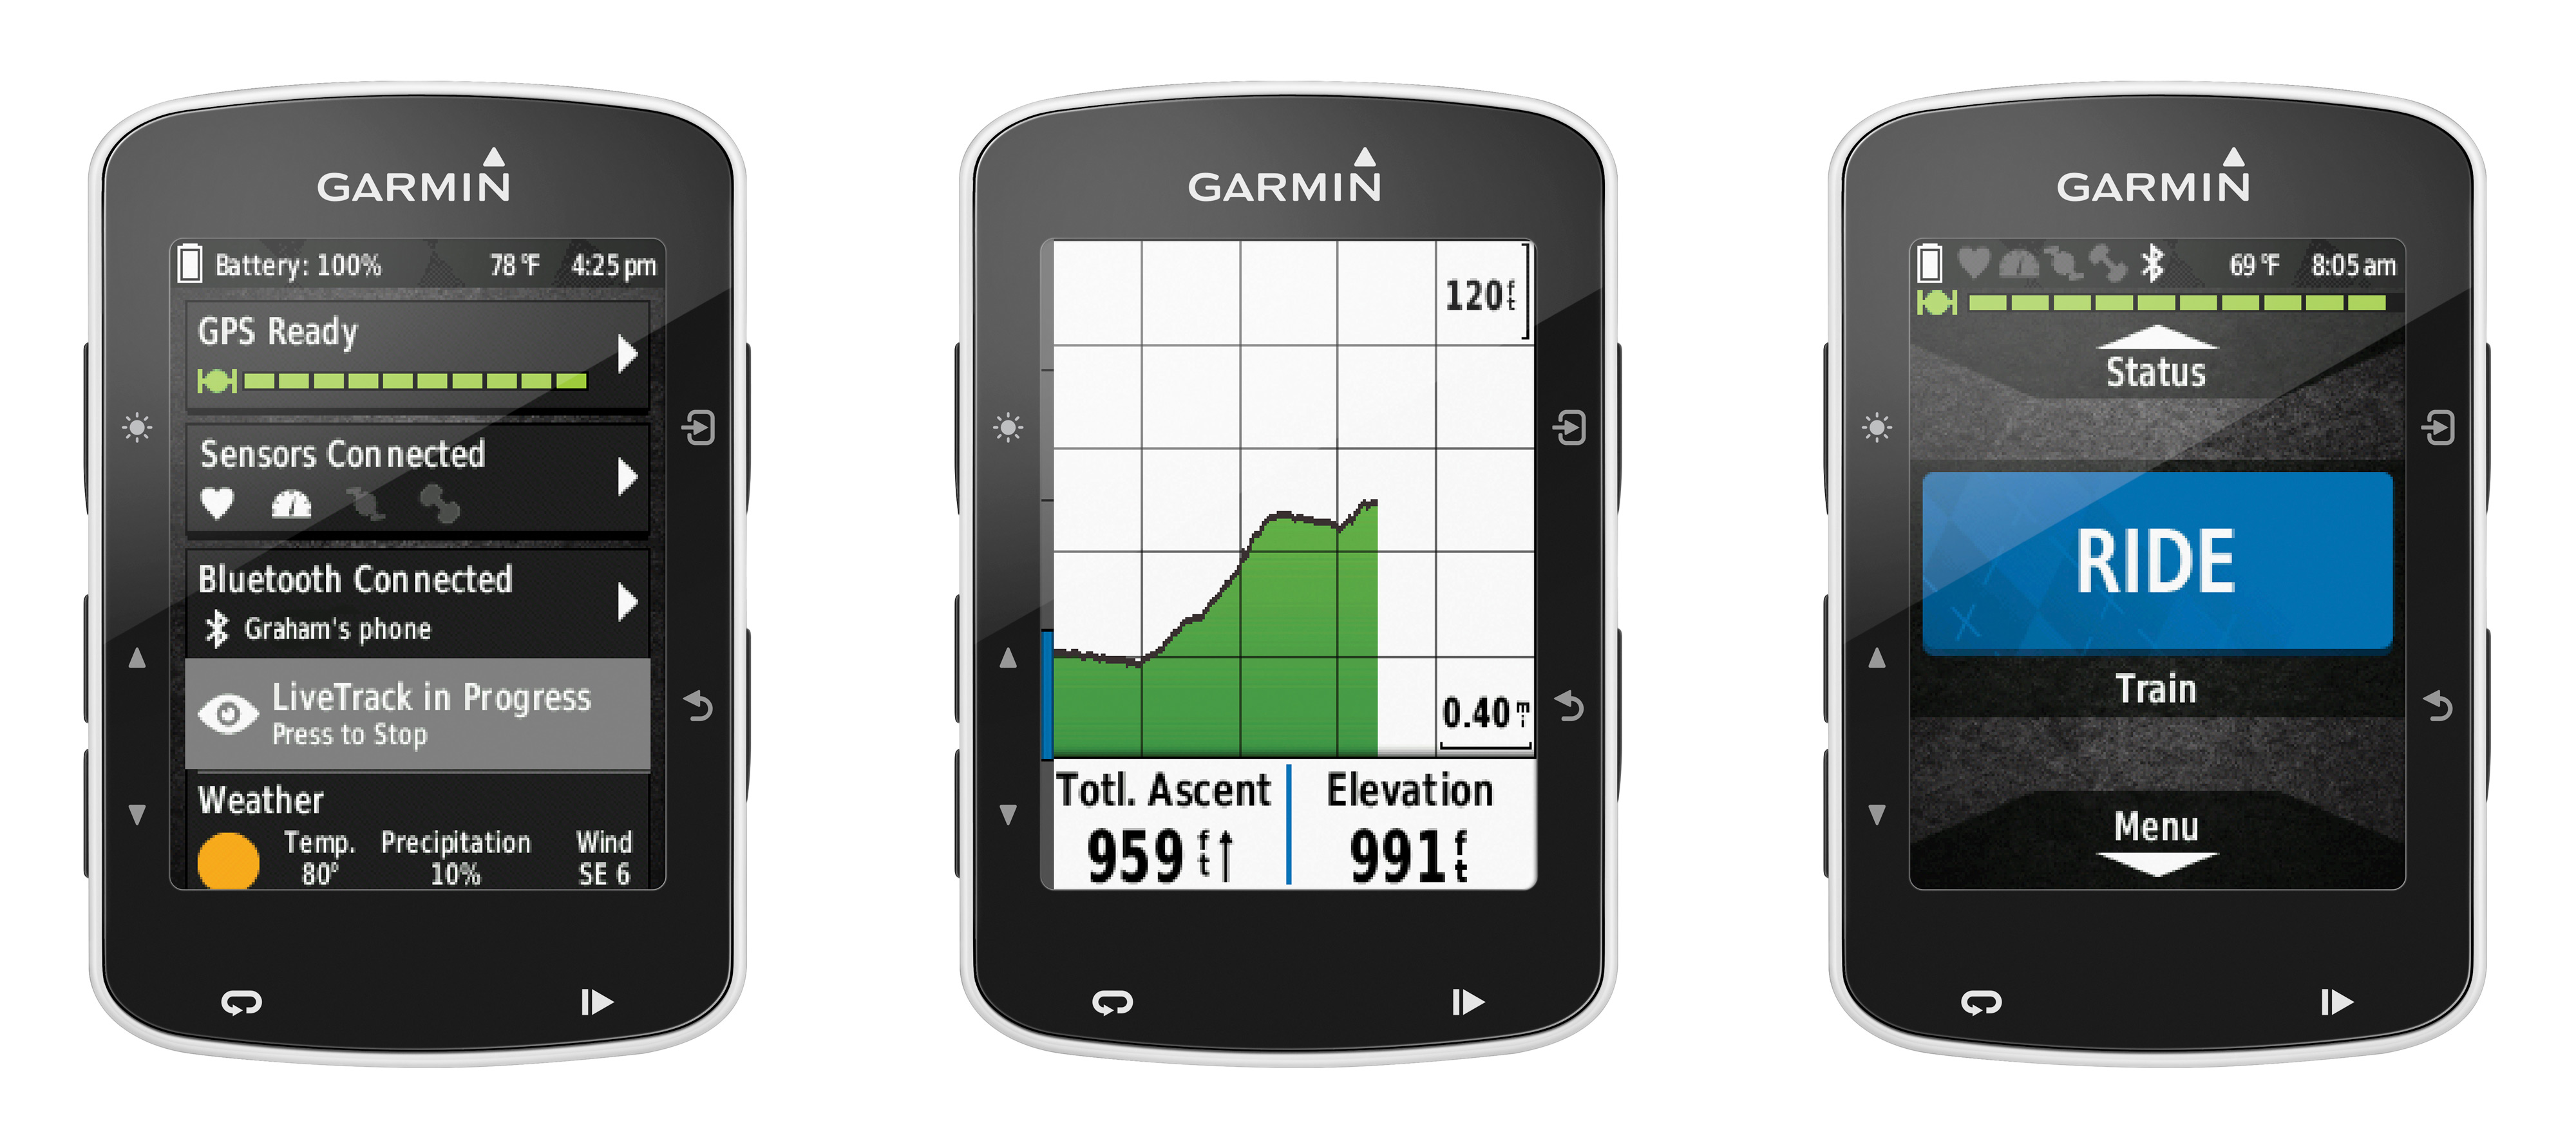 Meet your competitive with the Edge 520 from Garmin – the first GPS computer with Strava live segments - Garmin Blog